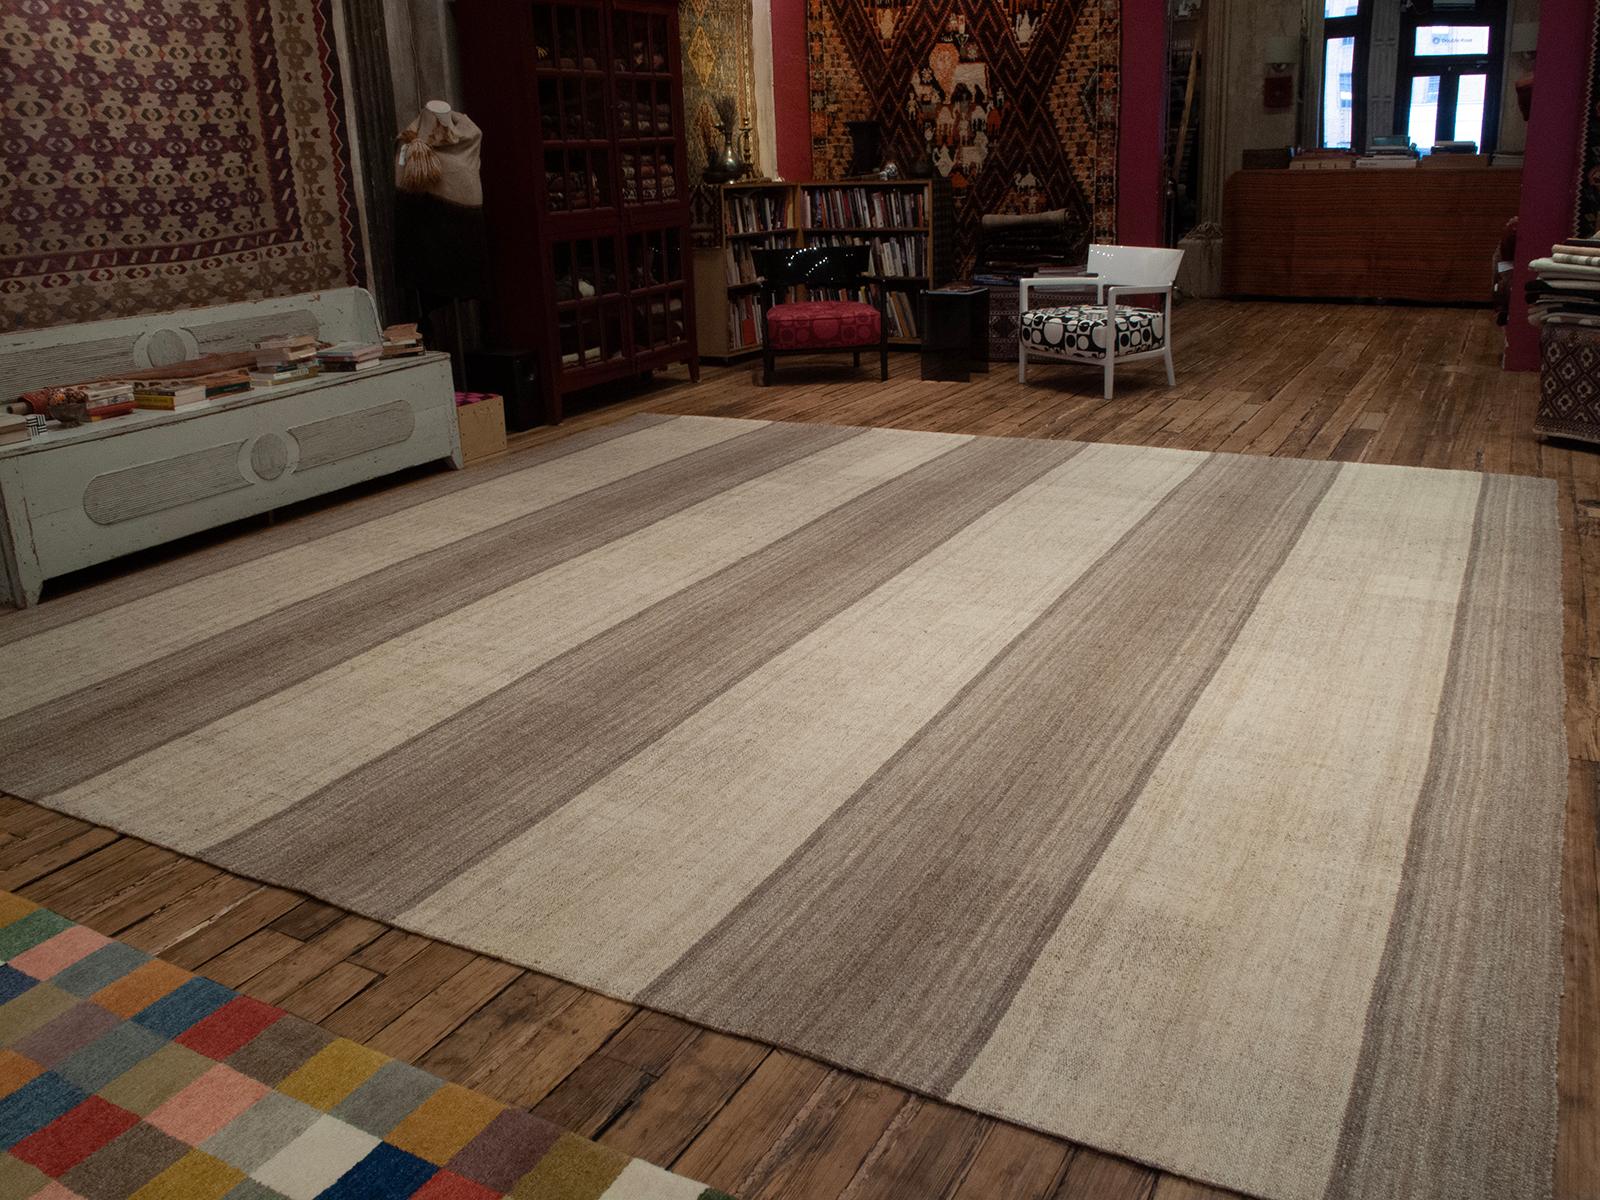 A large tribal flat-woven floor cover from Eastern Turkey. Woven with high quality, local, hand-spun wool in natural (undyed) tones of light brown and beige - soft to the touch, it feels like a heavy blanket. An authentic tribal weaving with great